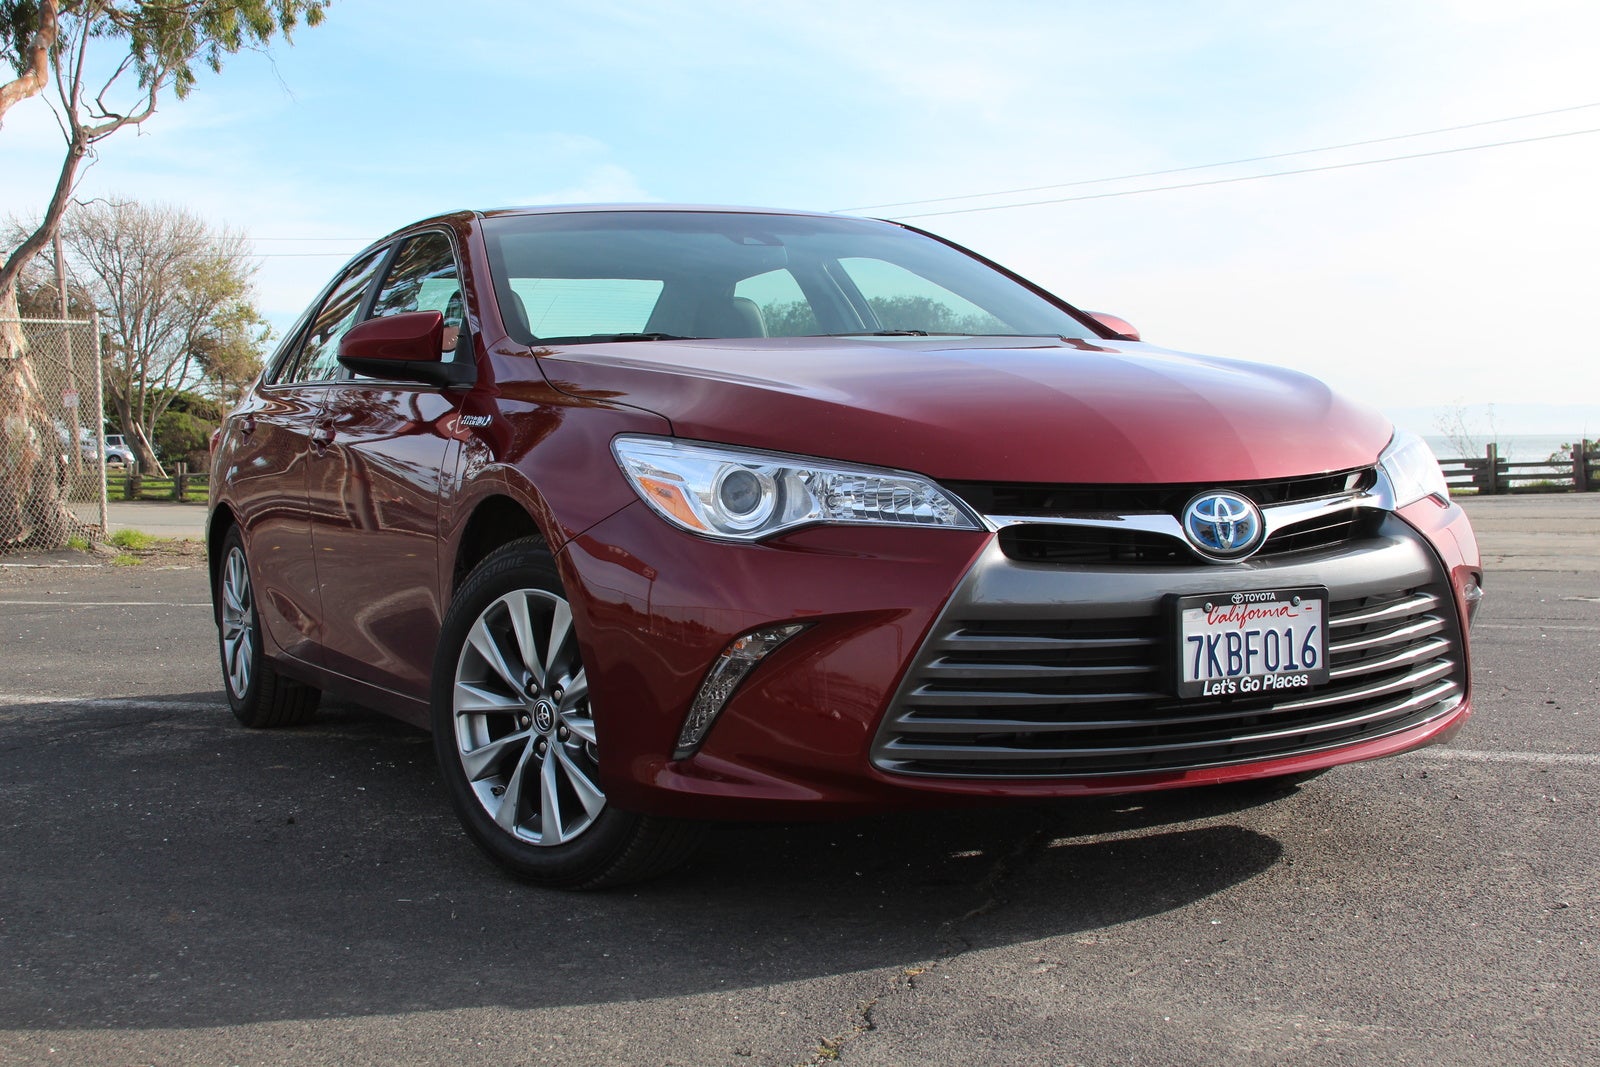 2016 / 2017 Toyota Camry for Sale in your area - CarGurus